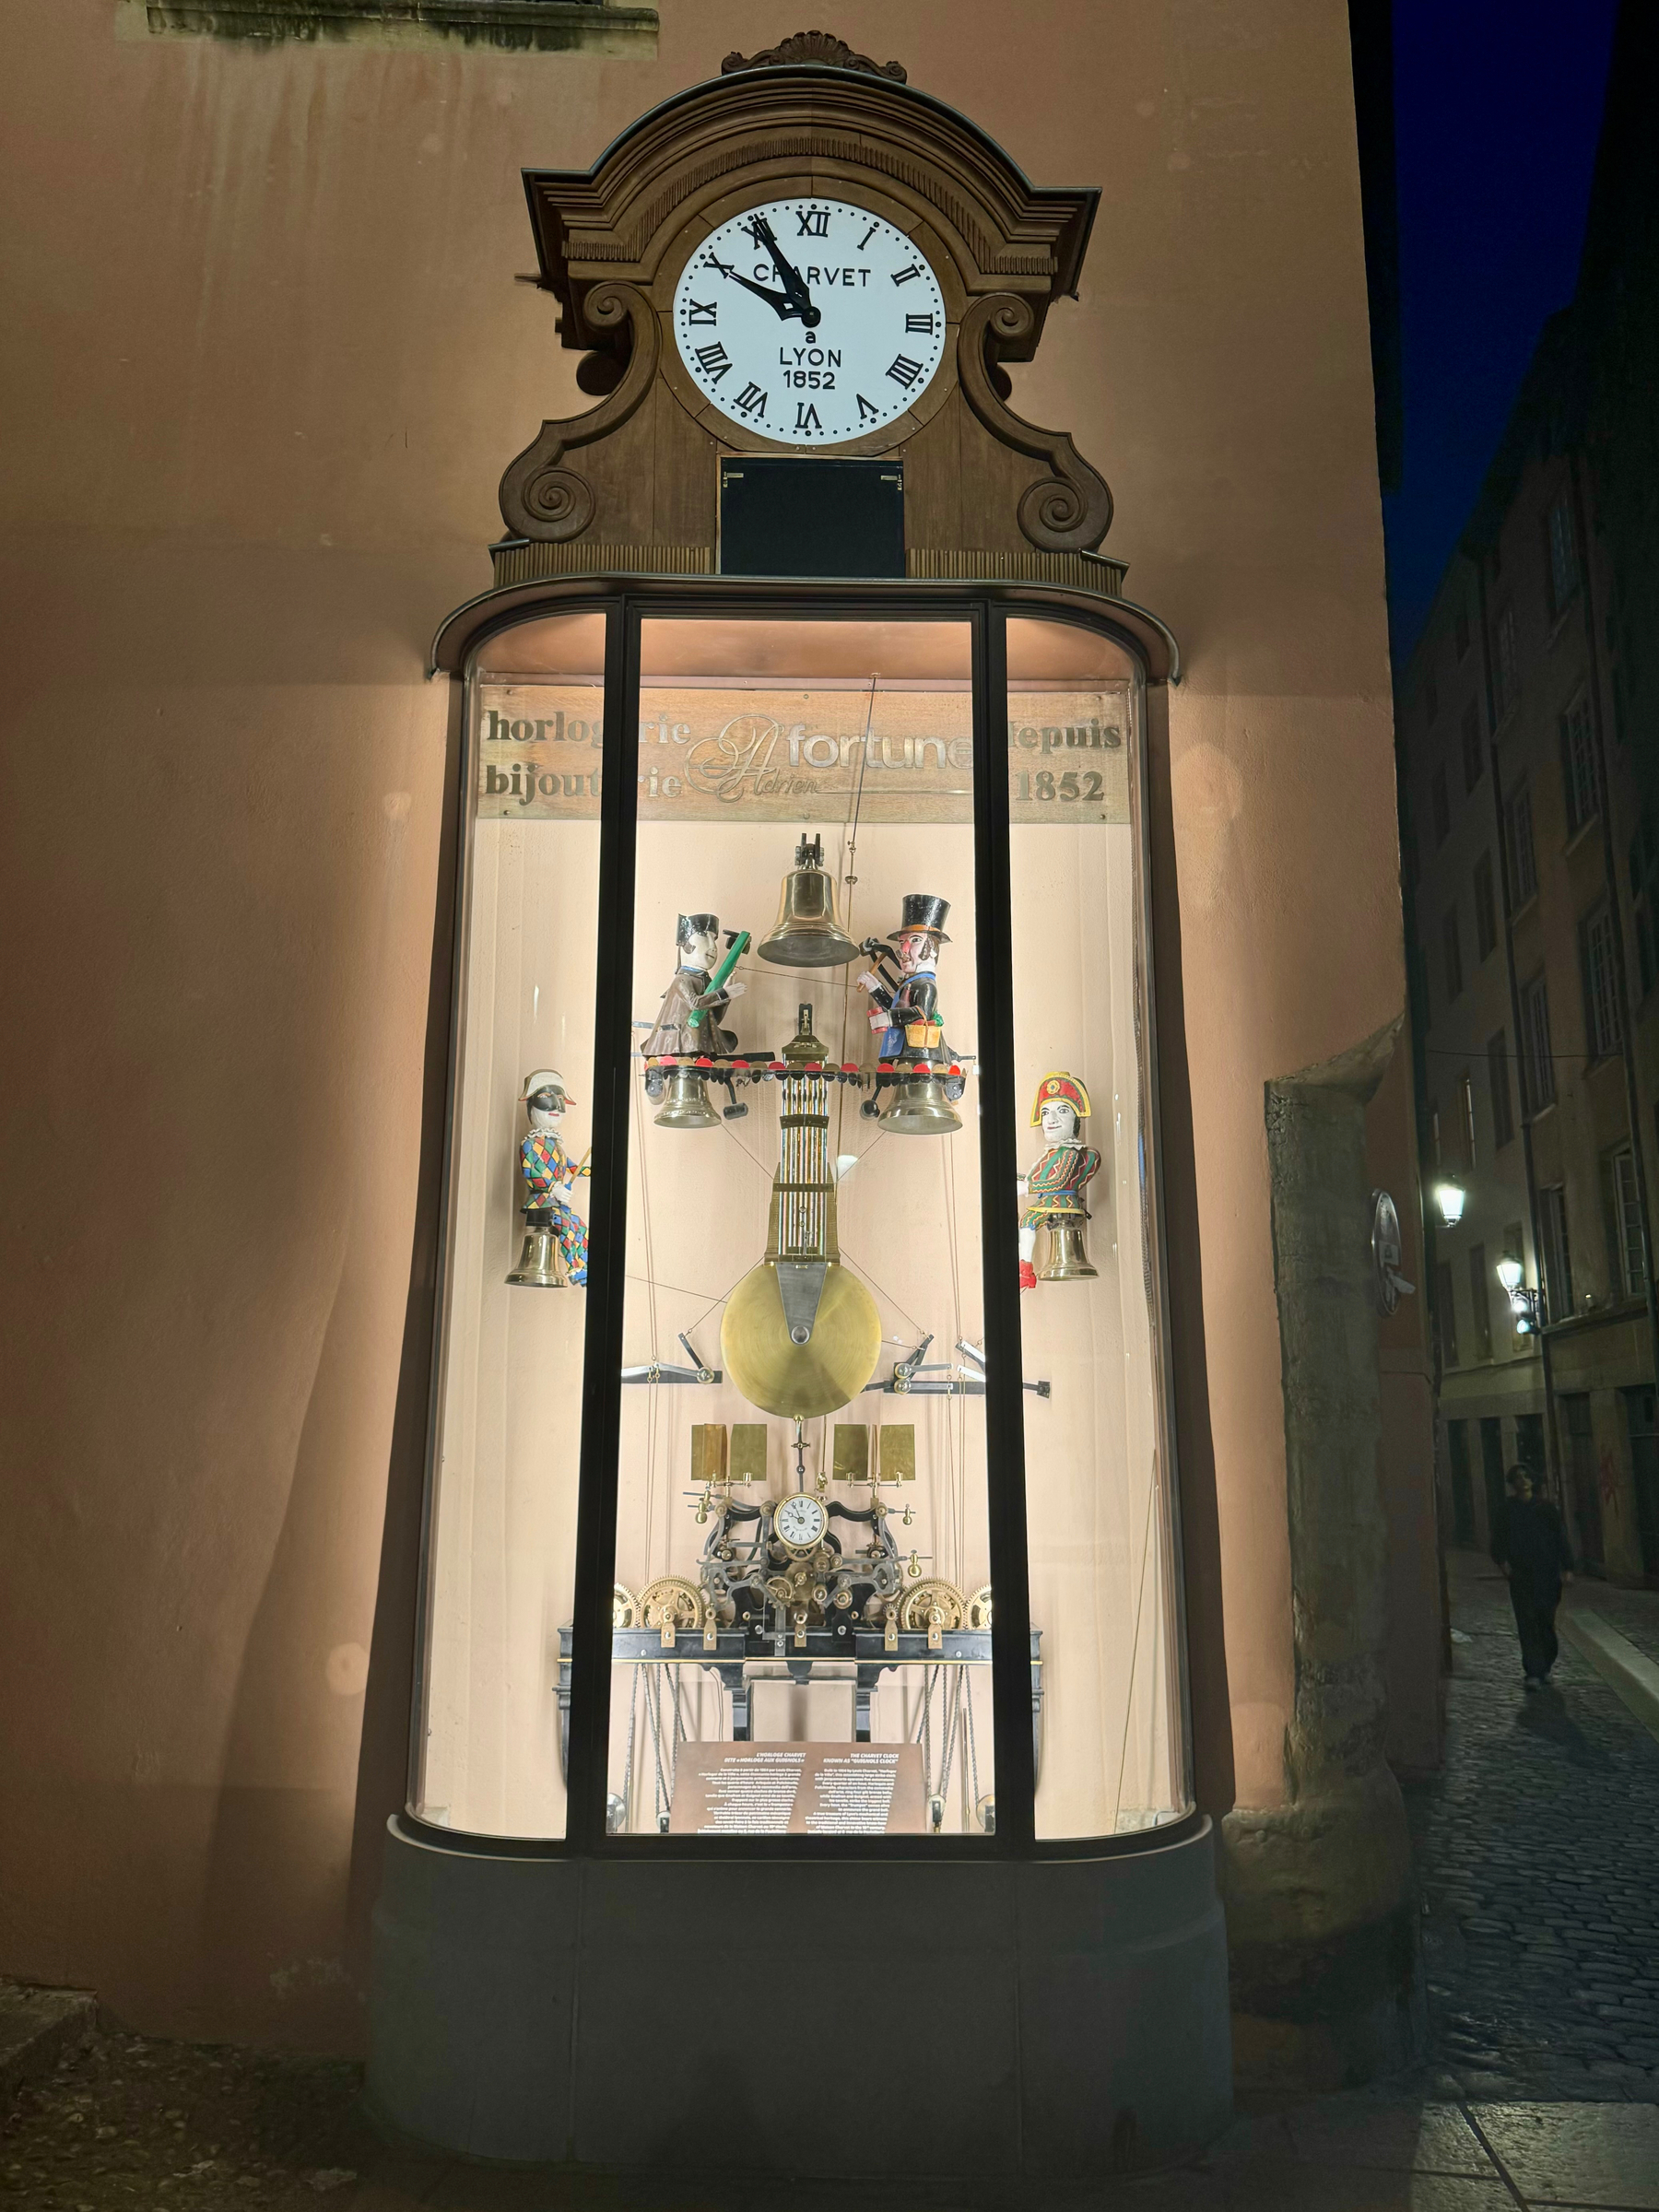 A clock shop window display at night featuring a large overhead wall clock with the brand “CRIVET” and “LYON 1852” and various clock mechanisms and artistic objects inside.